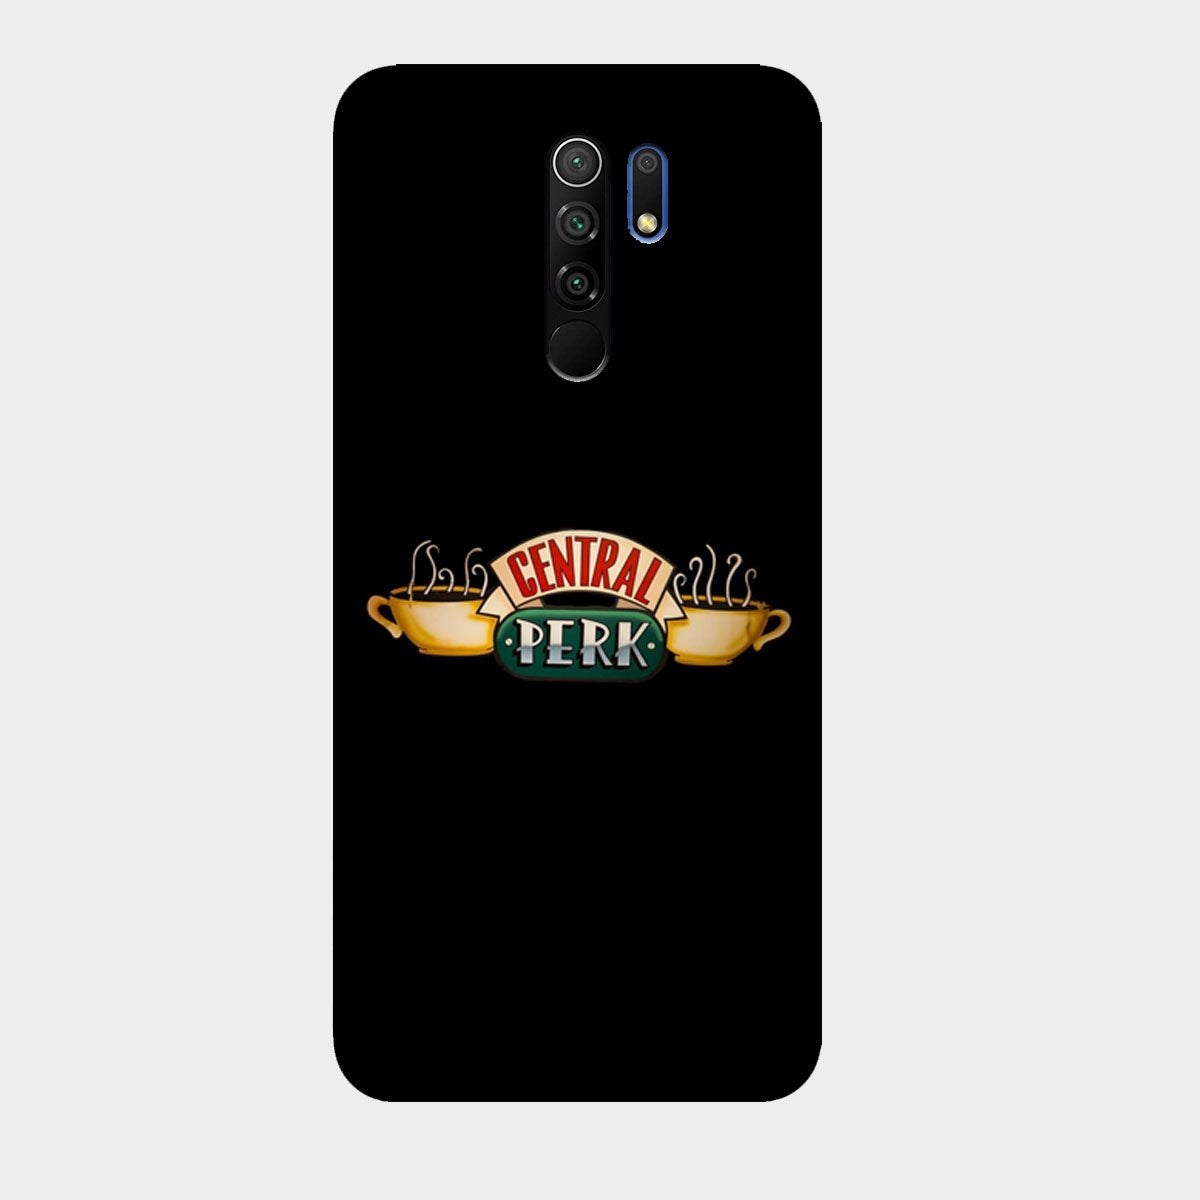 Central Perk - Friends - Mobile Phone Cover - Hard Case